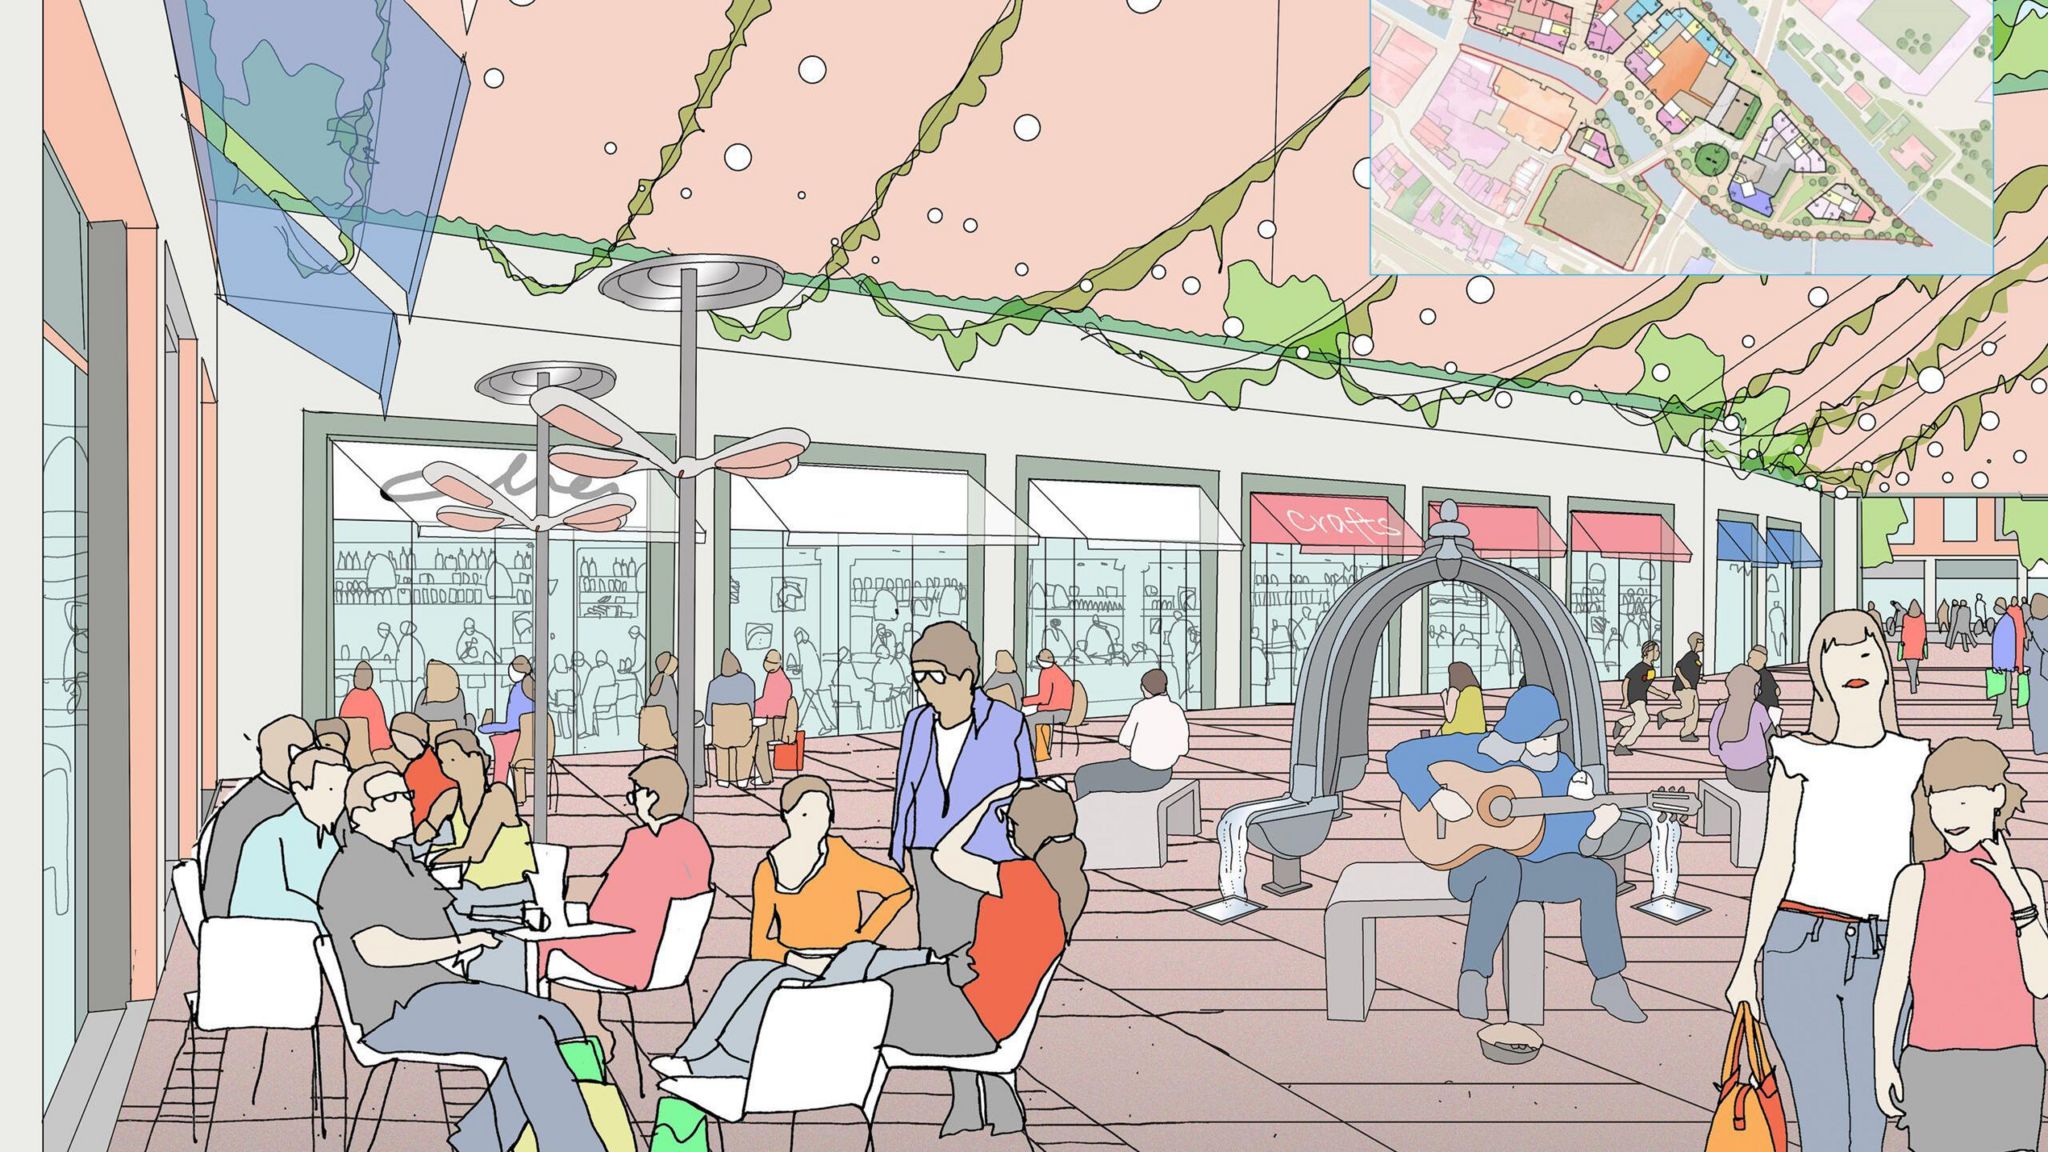 An artists impression of people sitting at a cafe in the foreground of a busy, developed new city centre